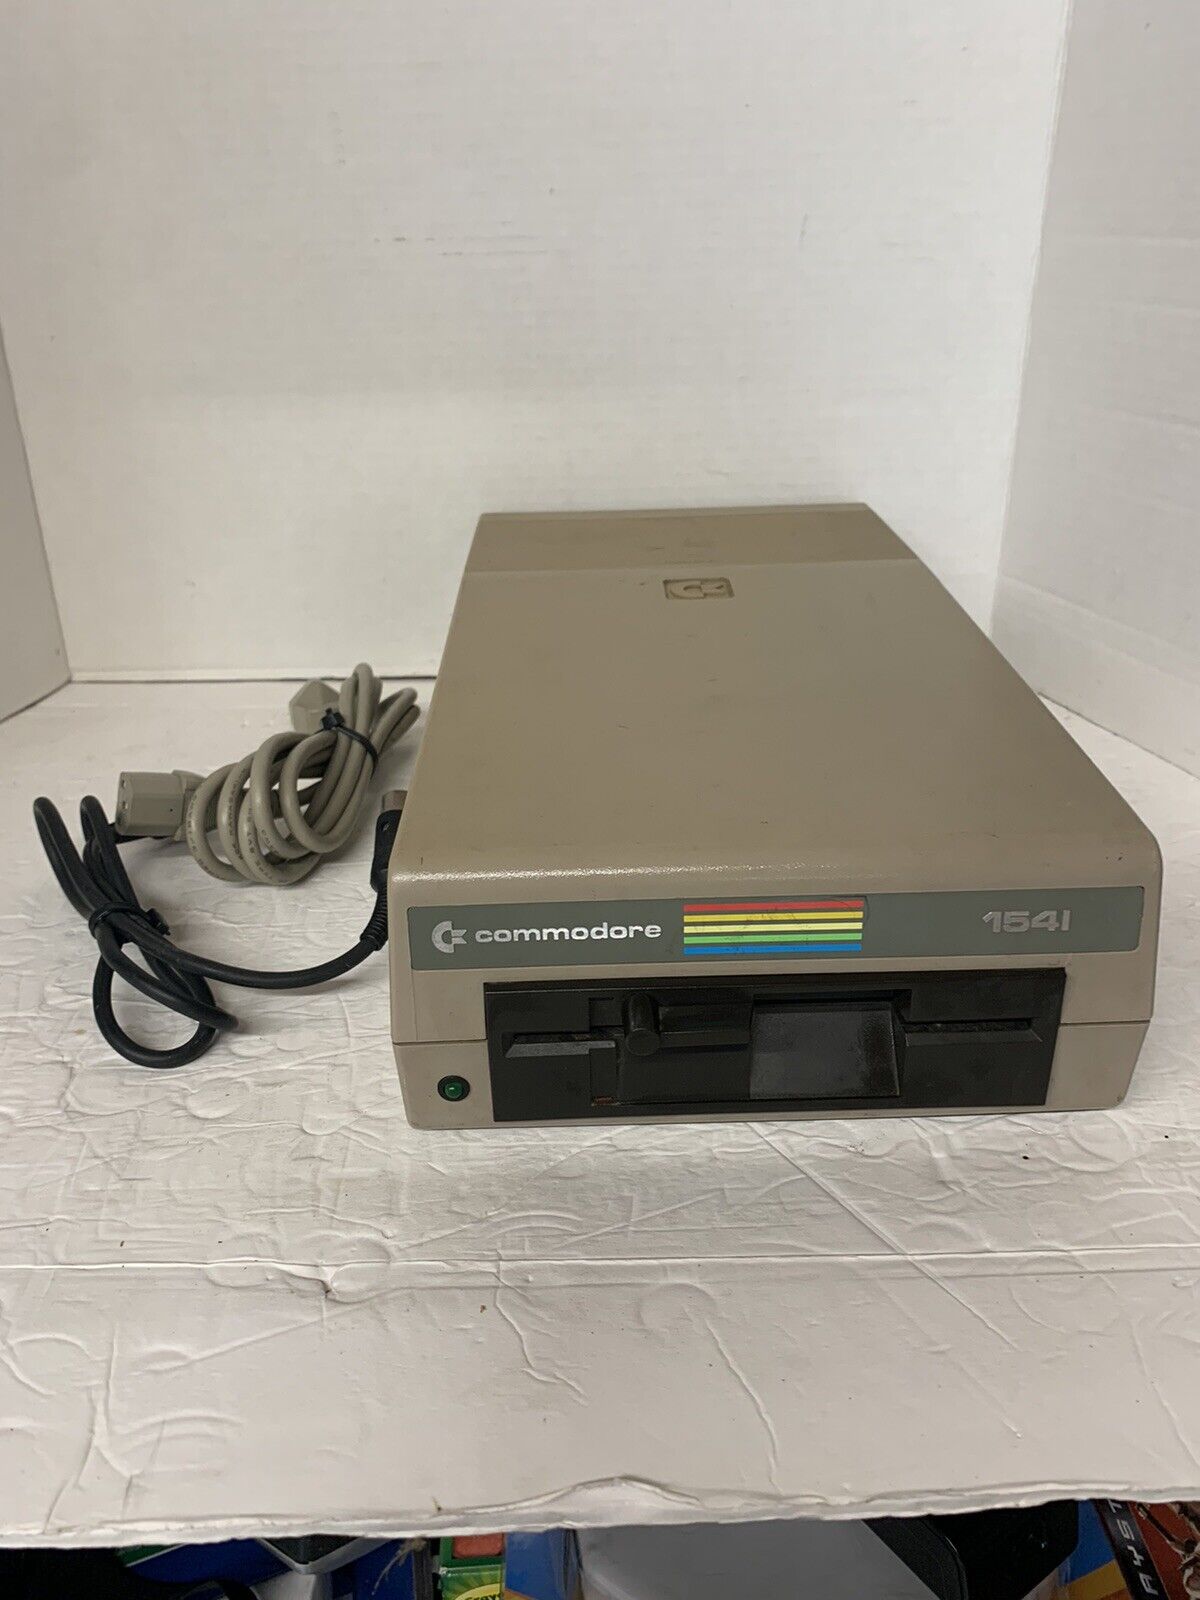 Commodore Model 1541 Floppy Disc Drive Vintage C64 External + Power Cord Tested